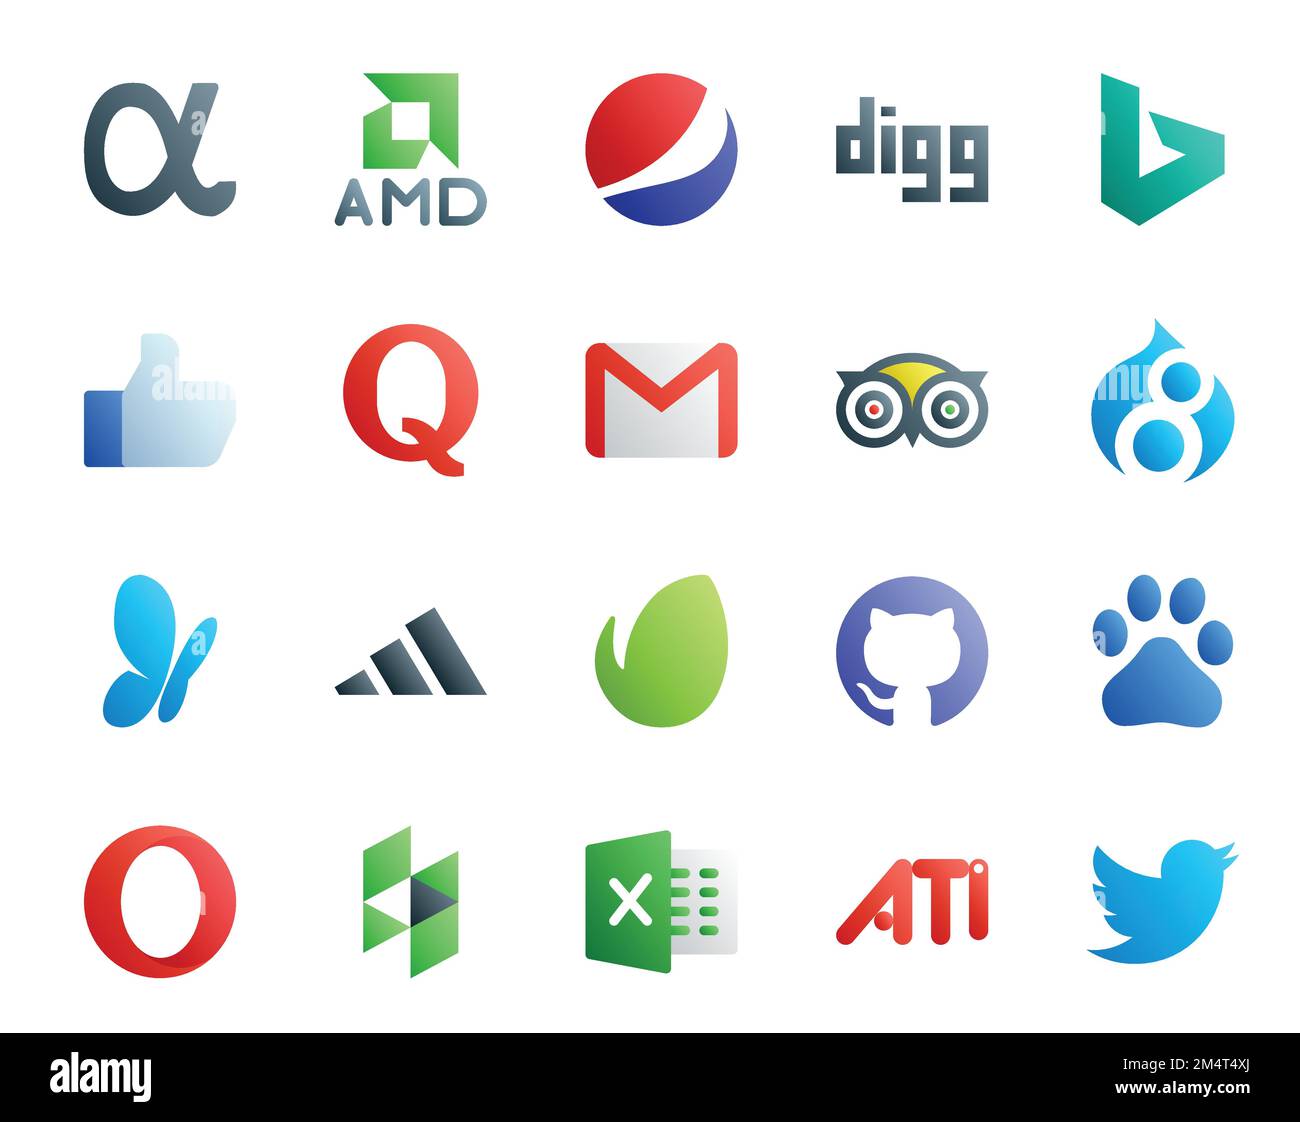 20 Social Media Icon Pack Including github. adidas. gmail. msn. travel Stock Vector